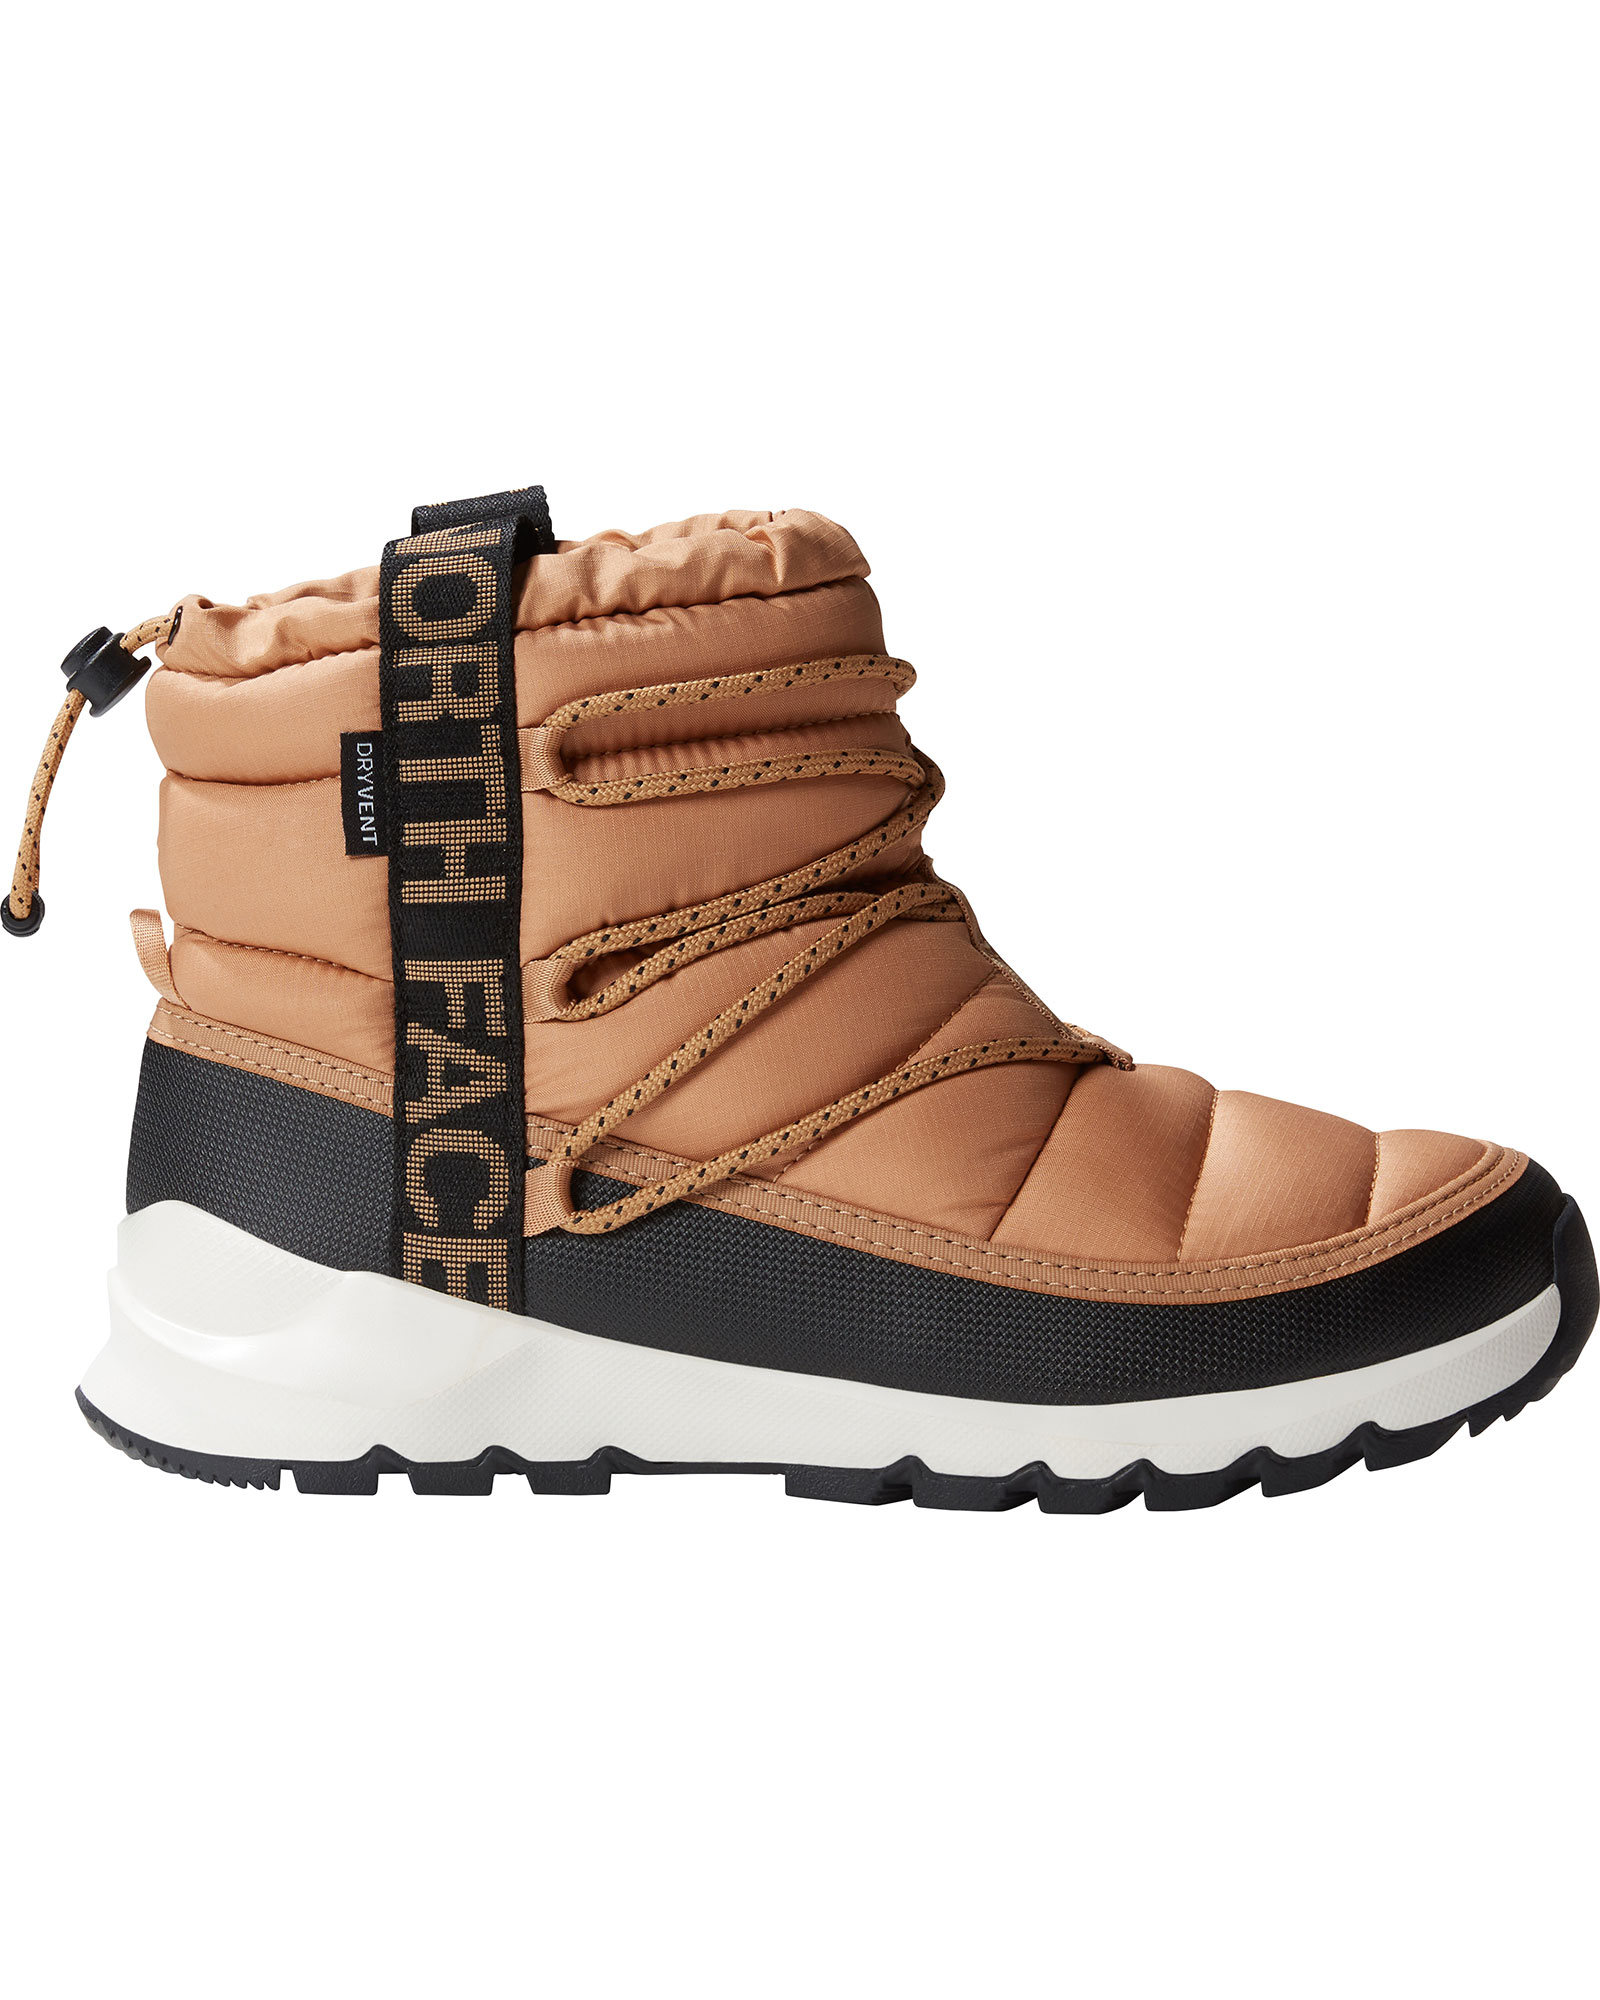 The North Face Women’s ThermoBall Lace Up Waterproof Boots - Almond Butter/TNF Black UK 8